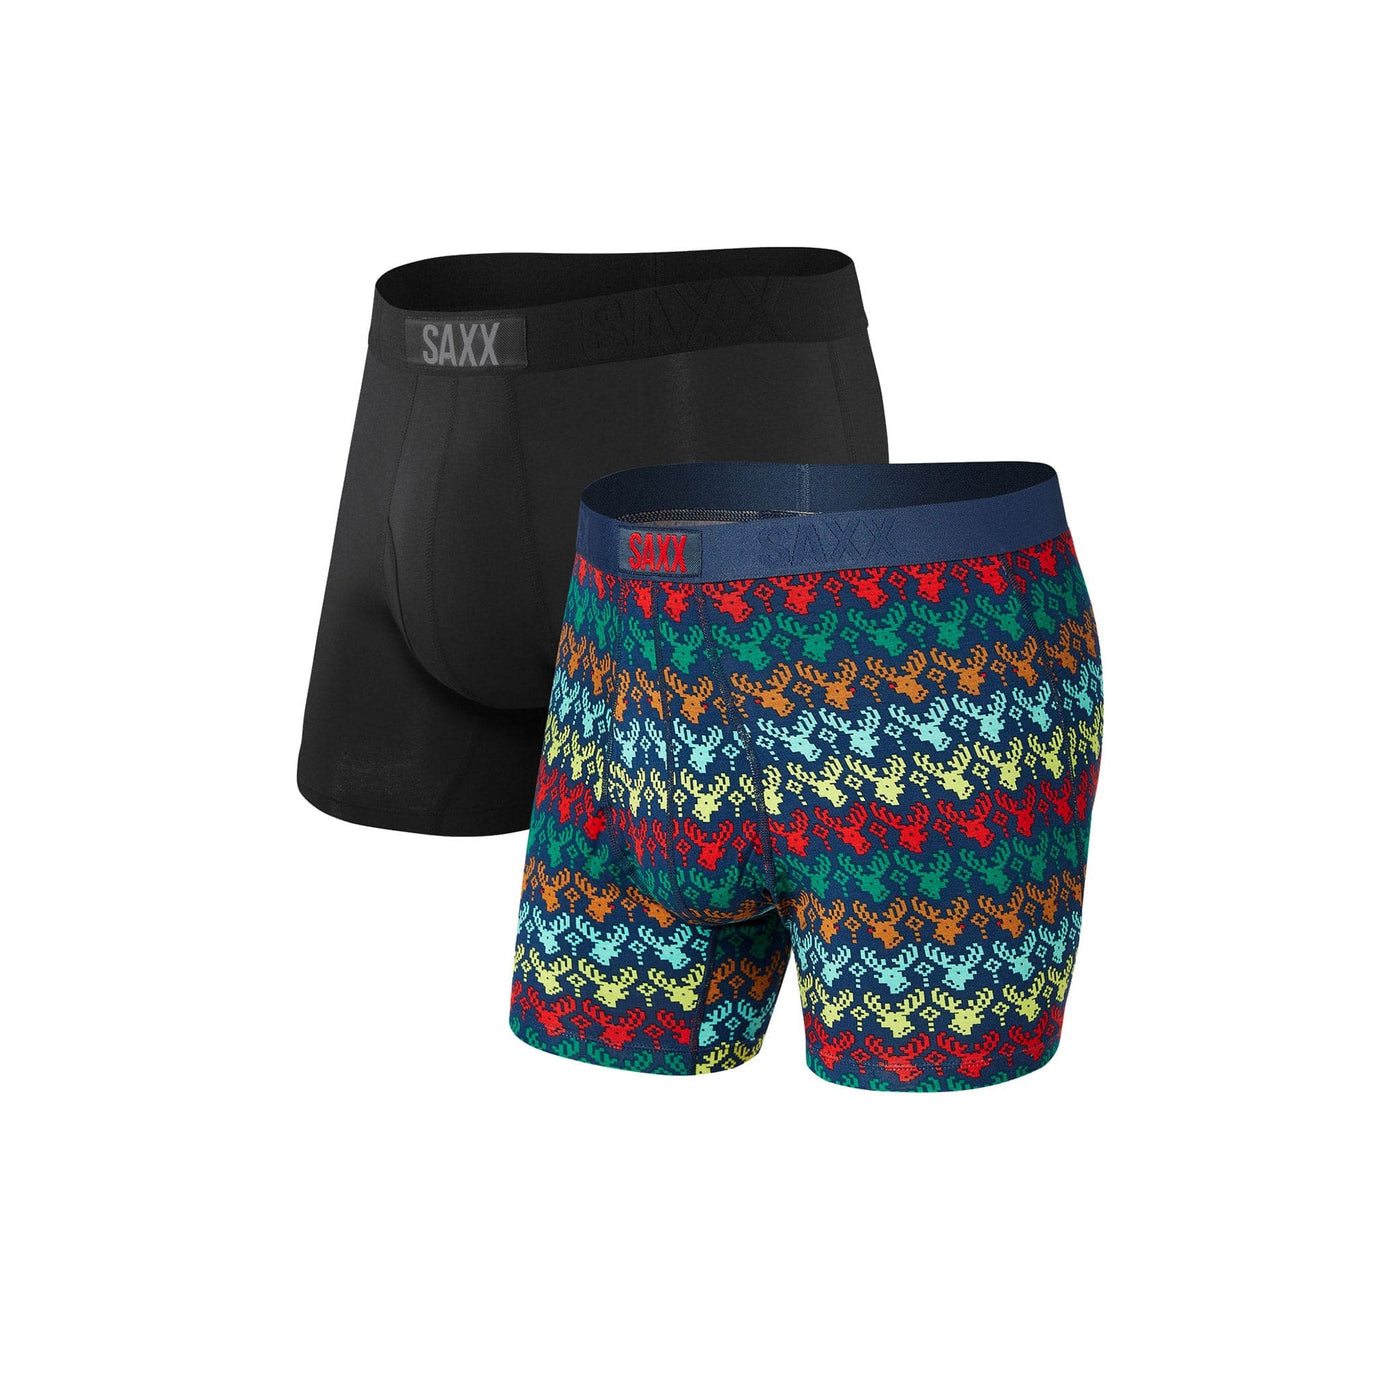 Saxx Ultra Boxers - Rudolph / Black (2 Pack)